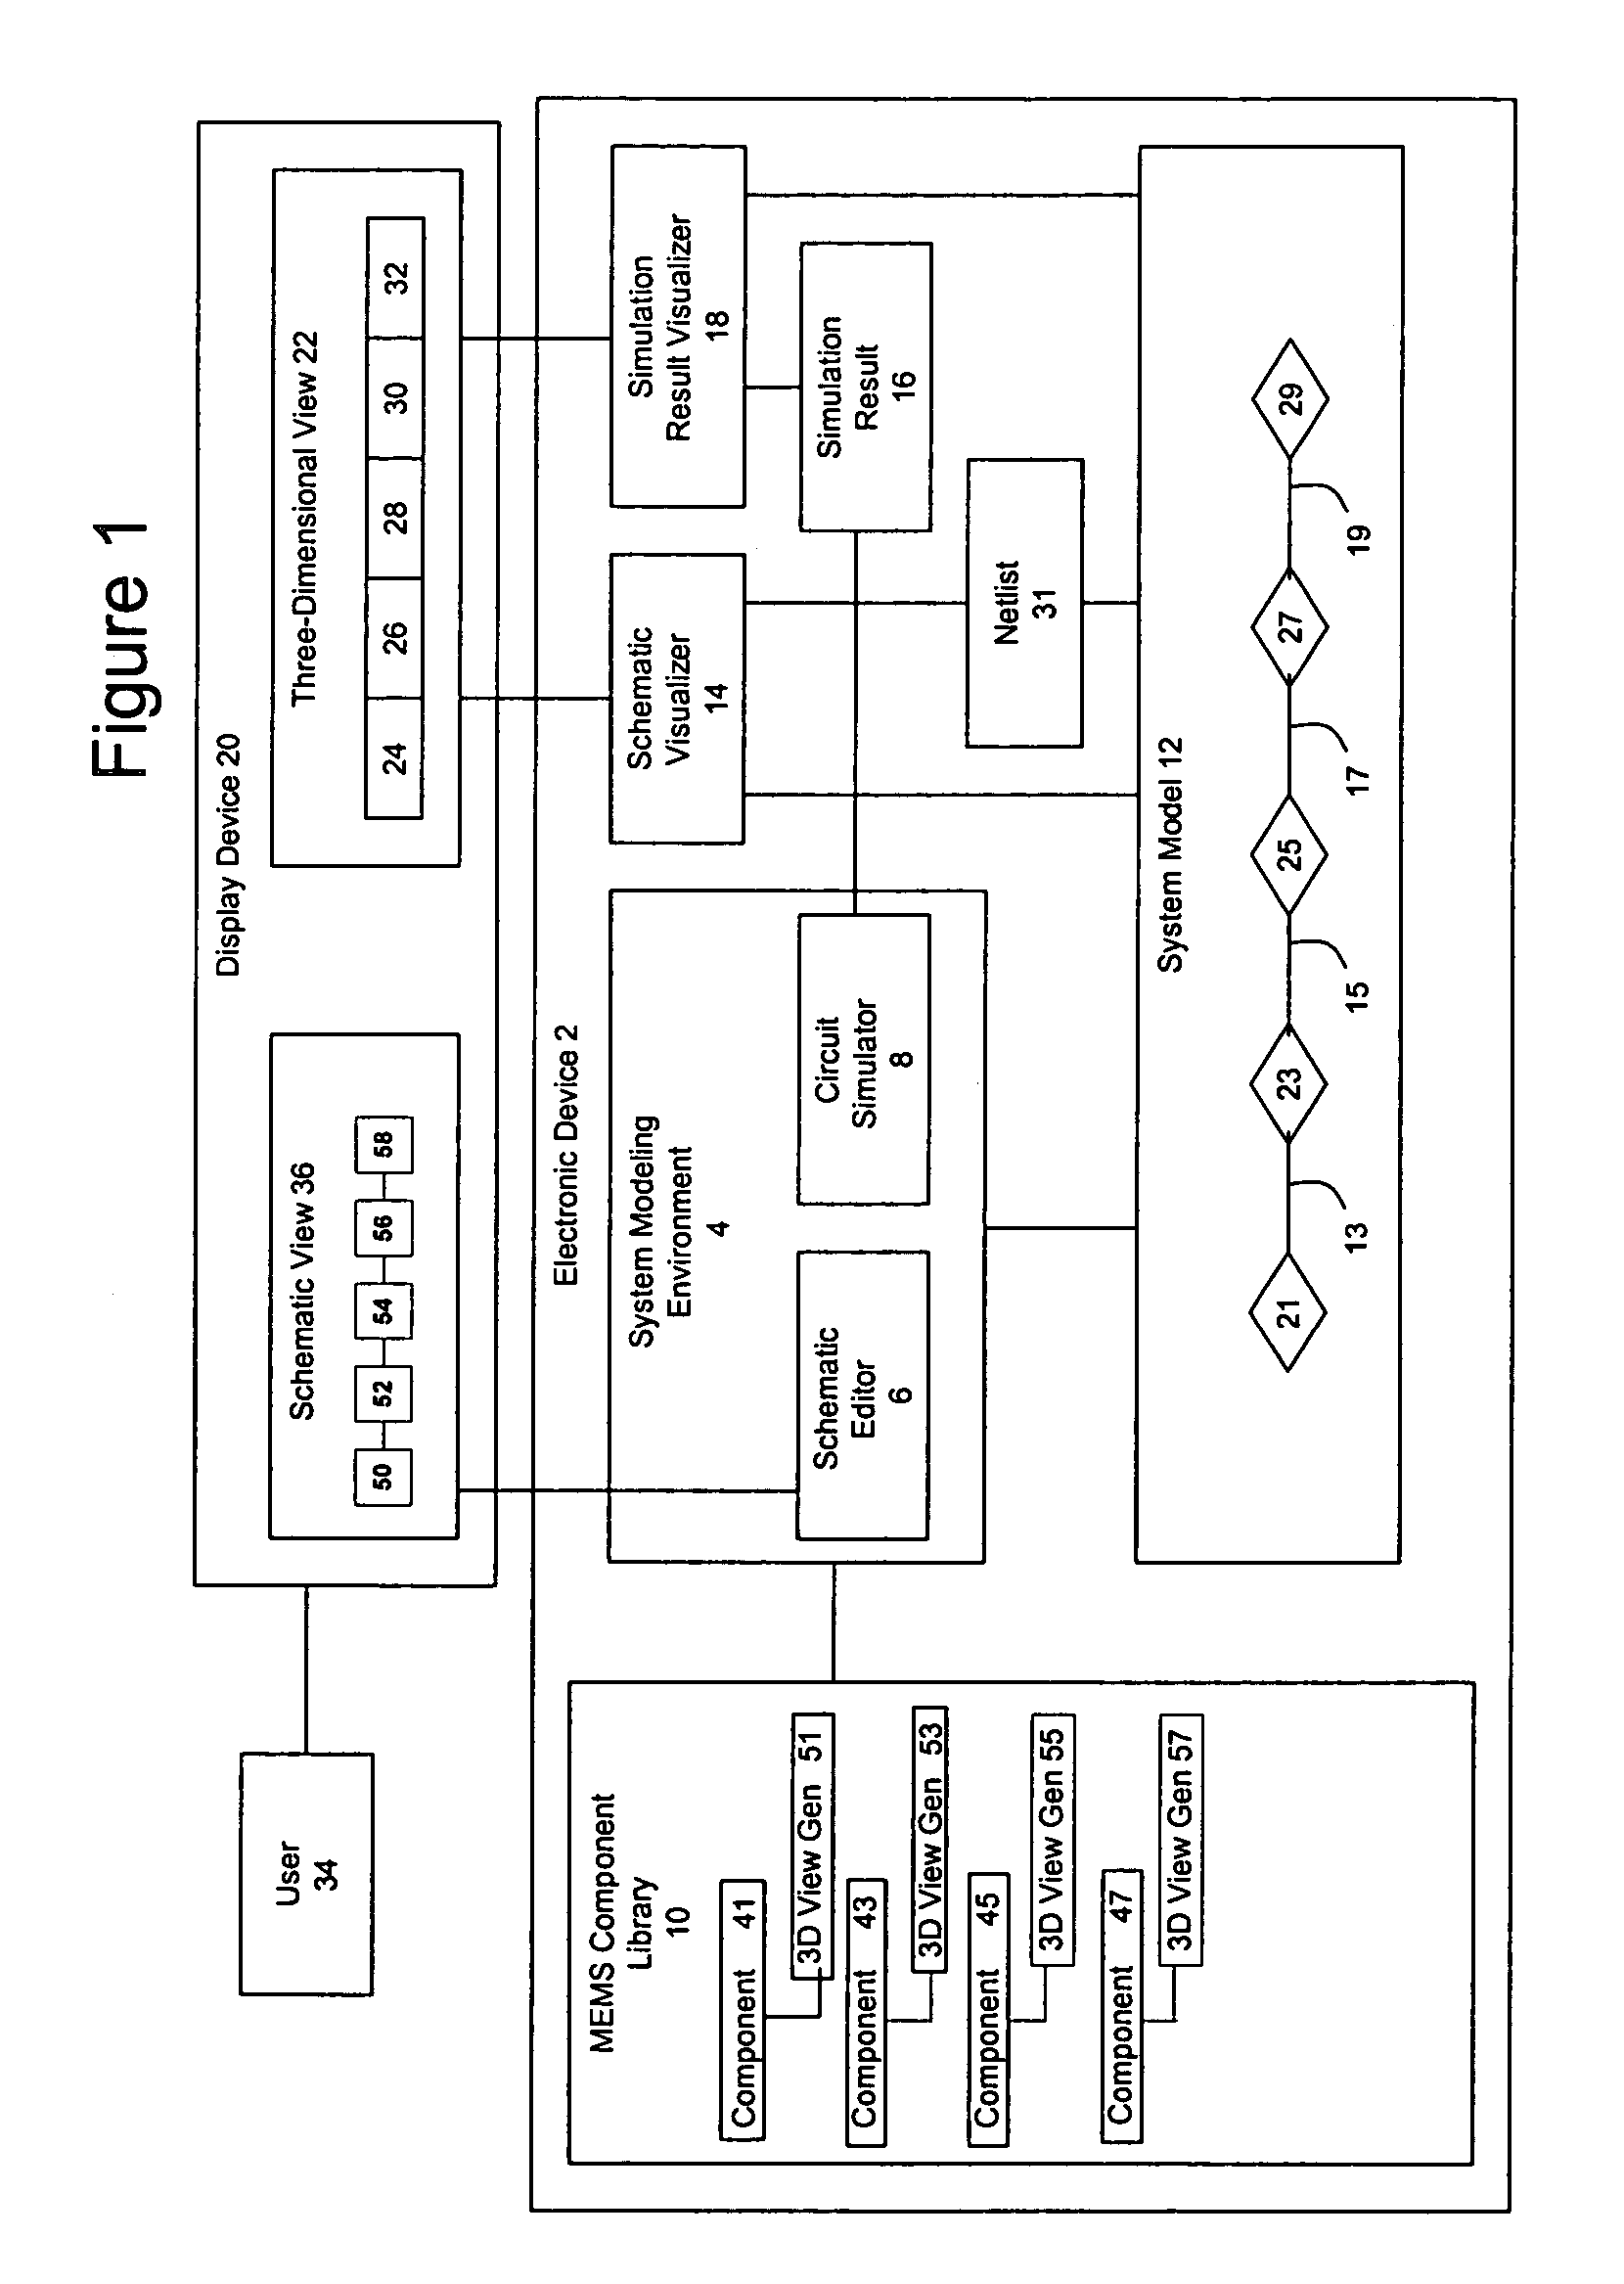 System and method for three-dimensional visualization and postprocessing of a system model